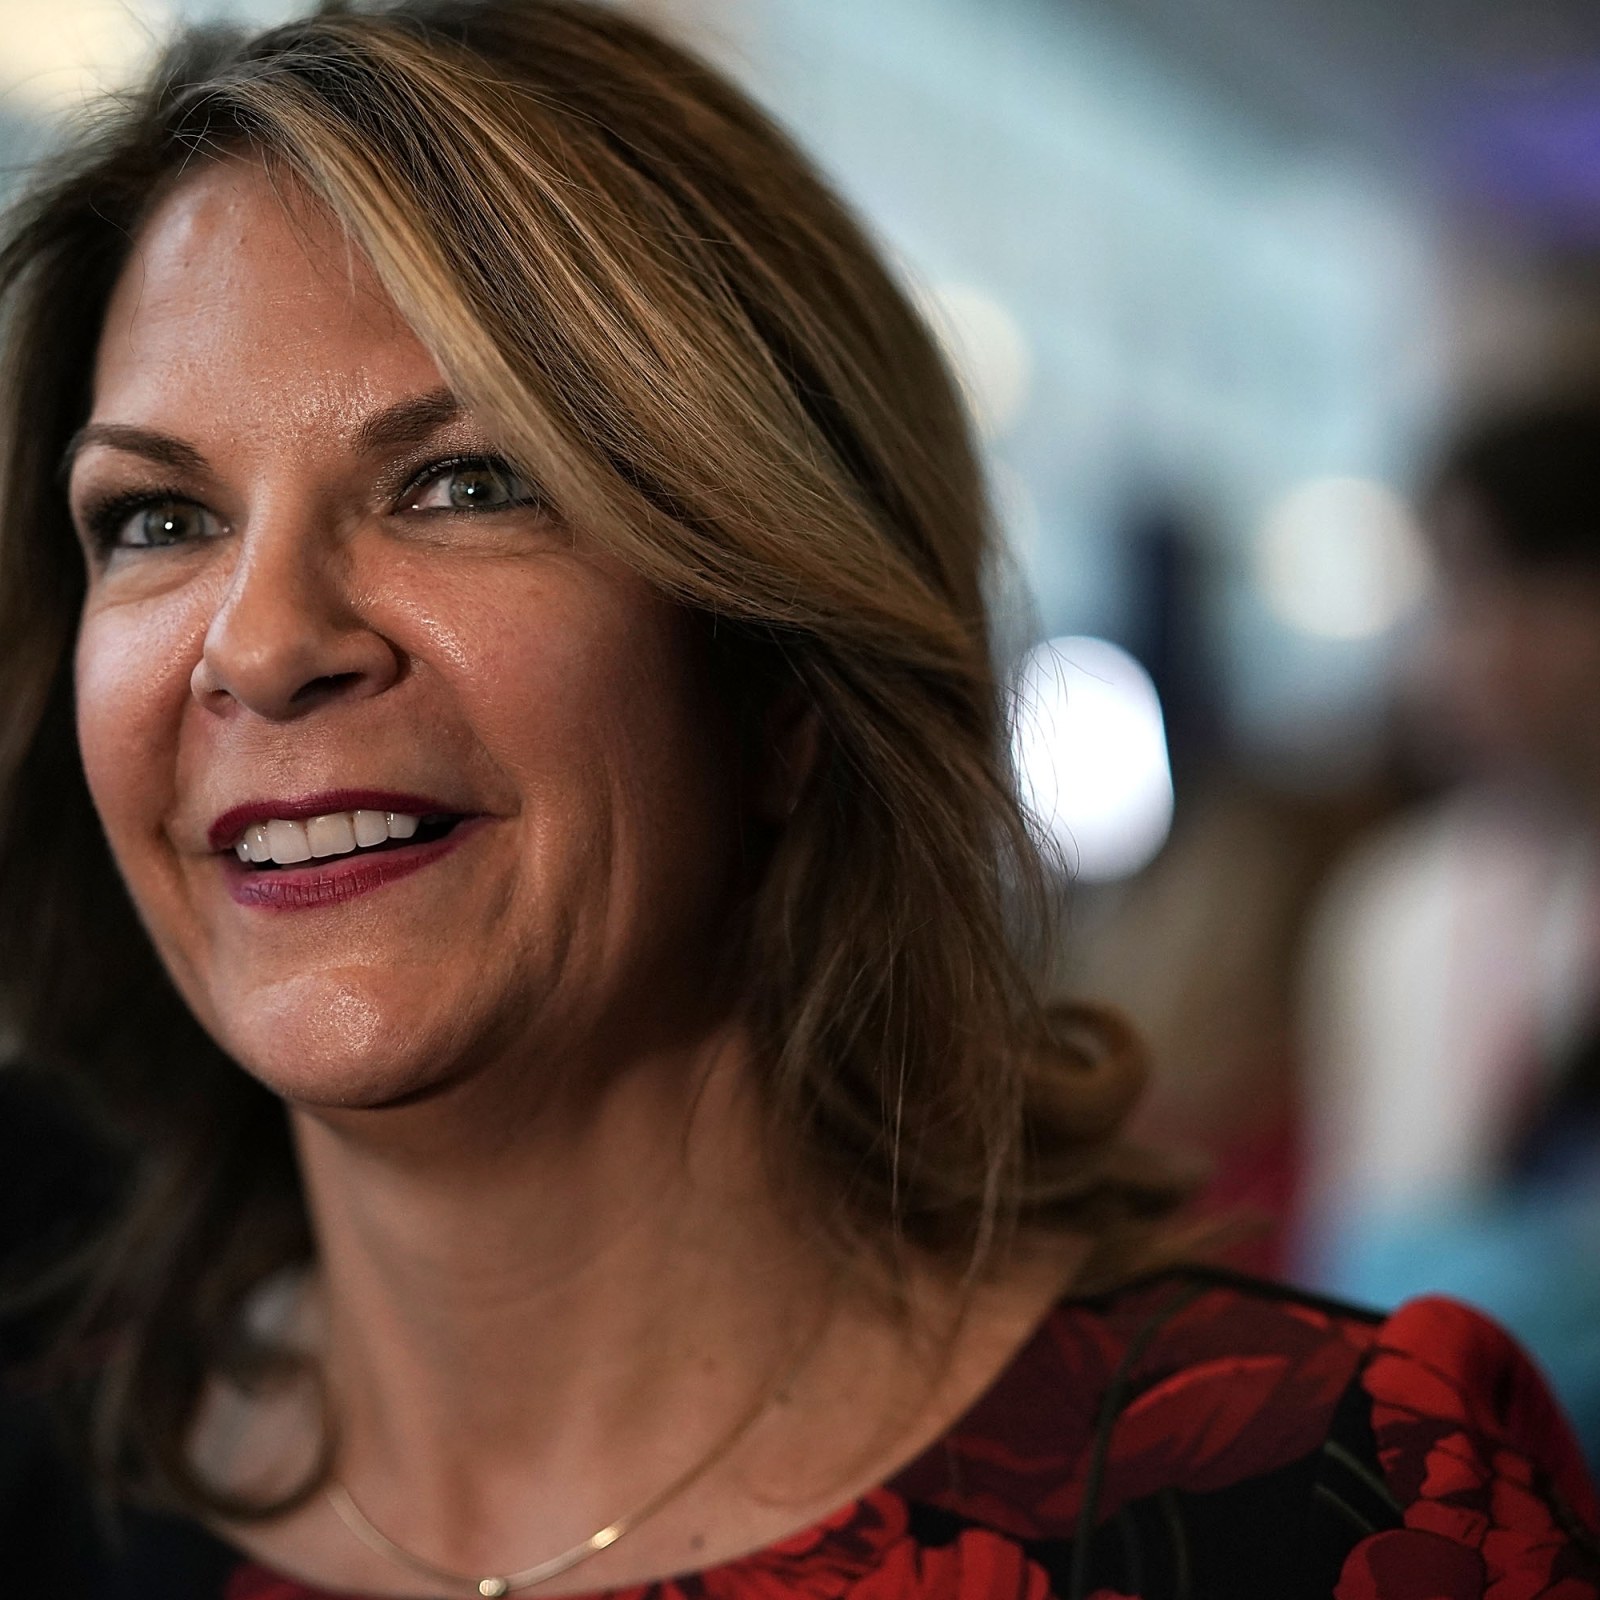 Video Of Kelli Ward Signing Fake Election Certification Re-emerges ...